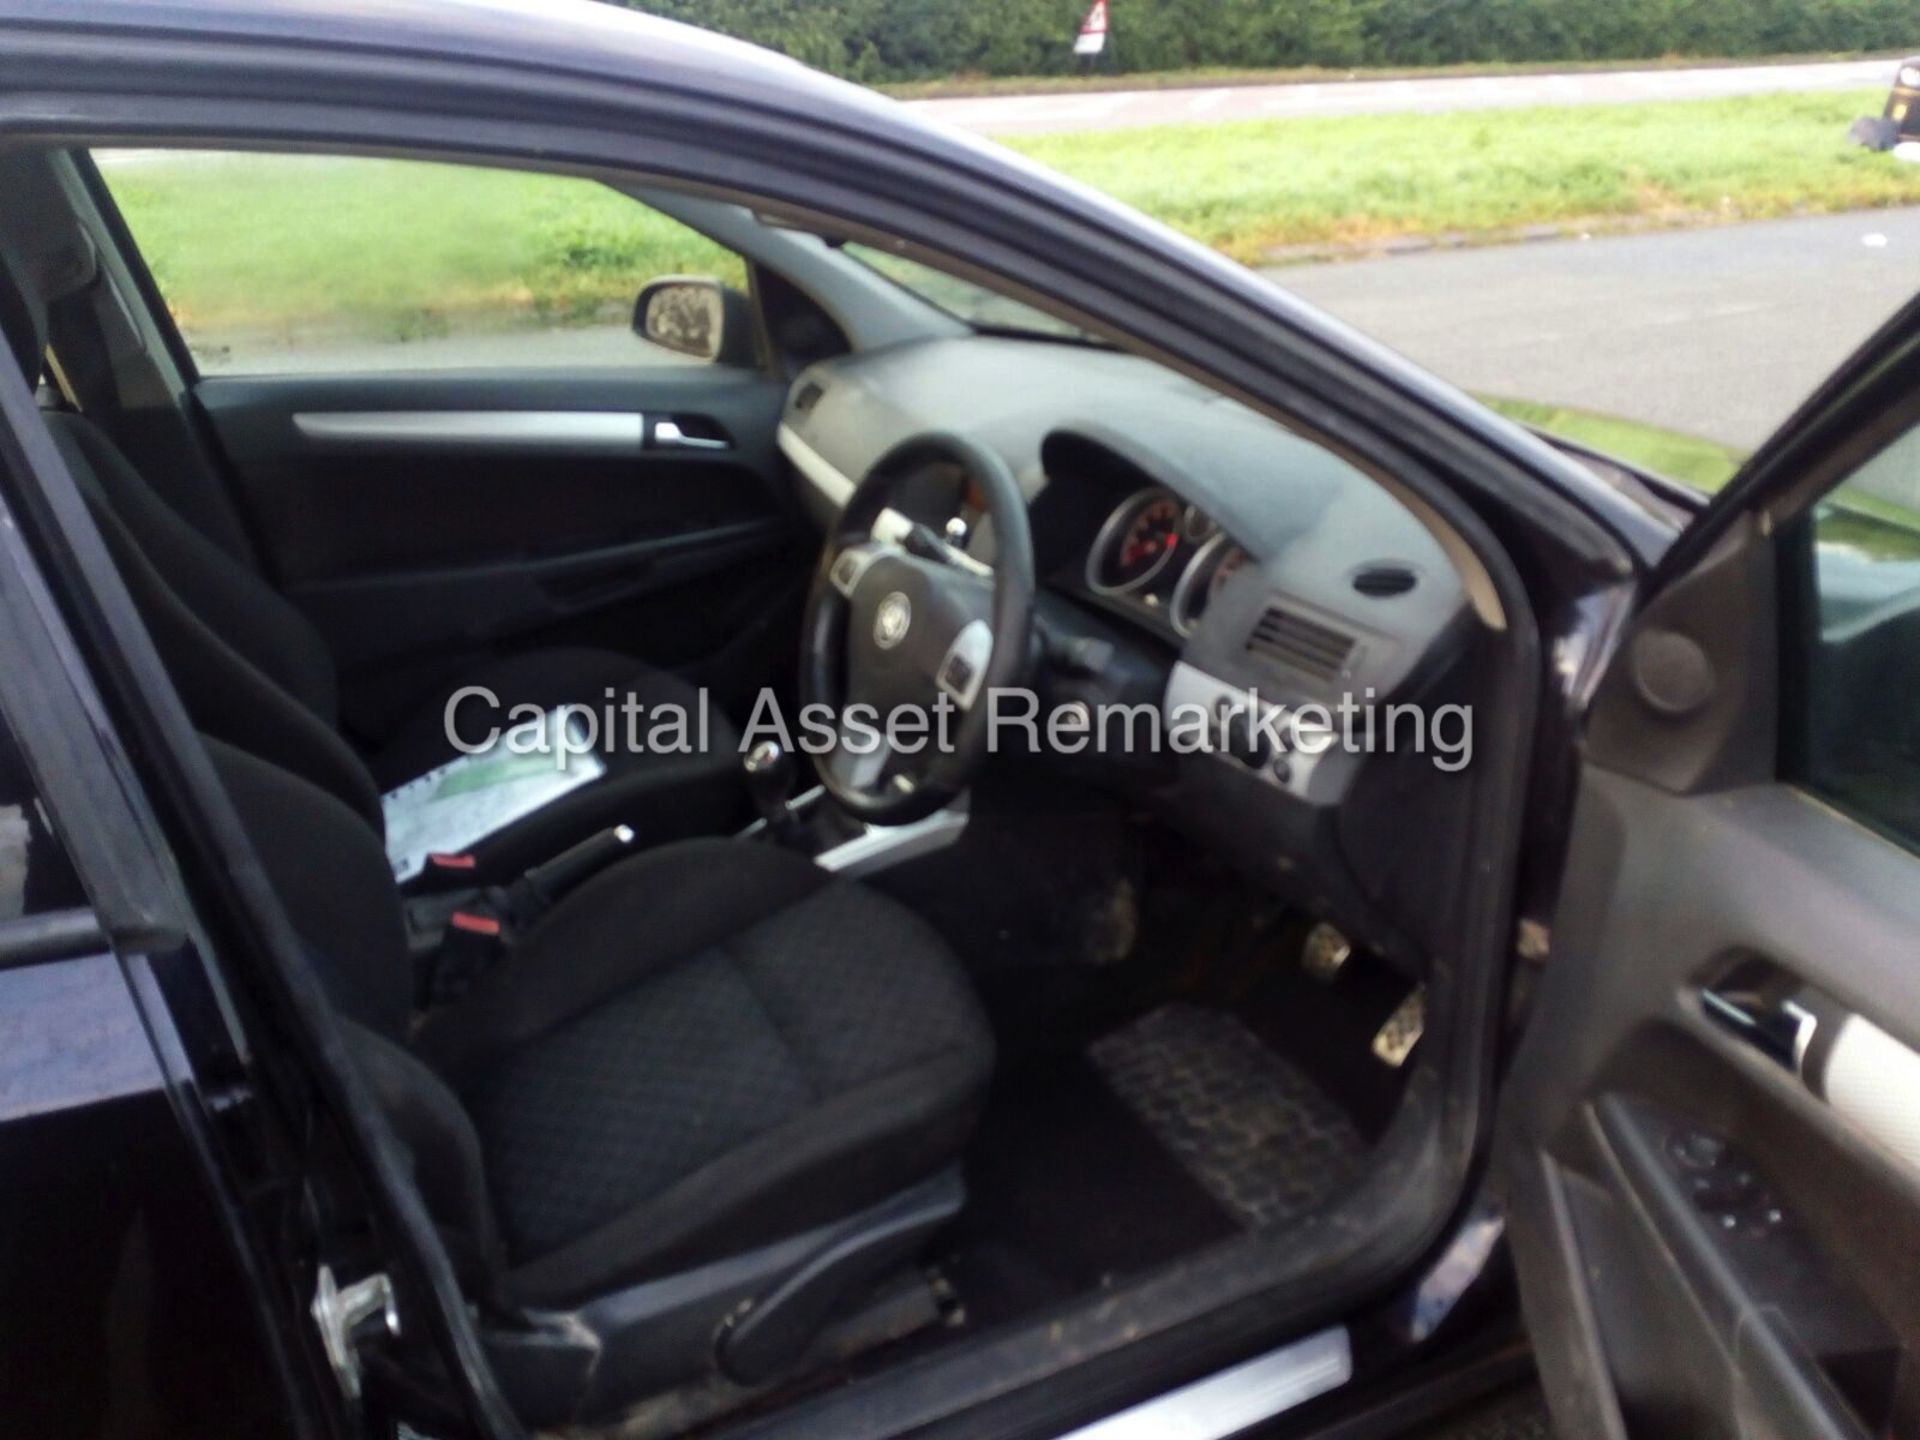 On Sale VAUXHALL ASTRA 1.6 "SXI - BLACK EDITION" HATCHBACK - AIR CON - ELEC PACK - ALLOYS - NO VAT - Image 6 of 8